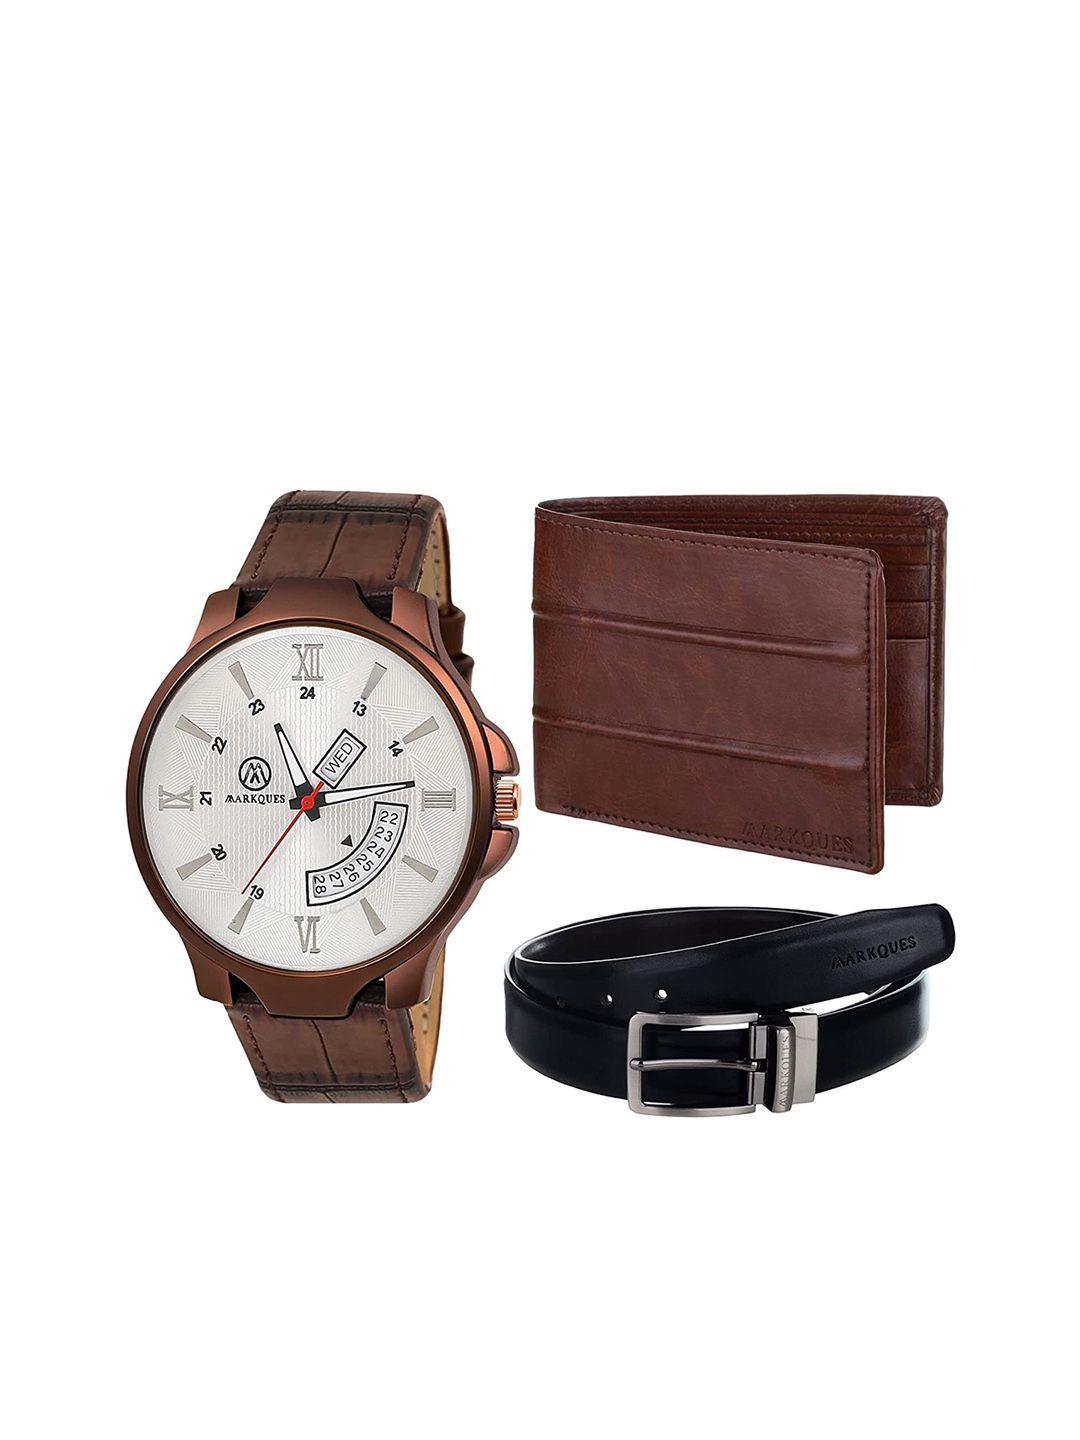 markques men brown solid watch, wallet and belt combo gift set